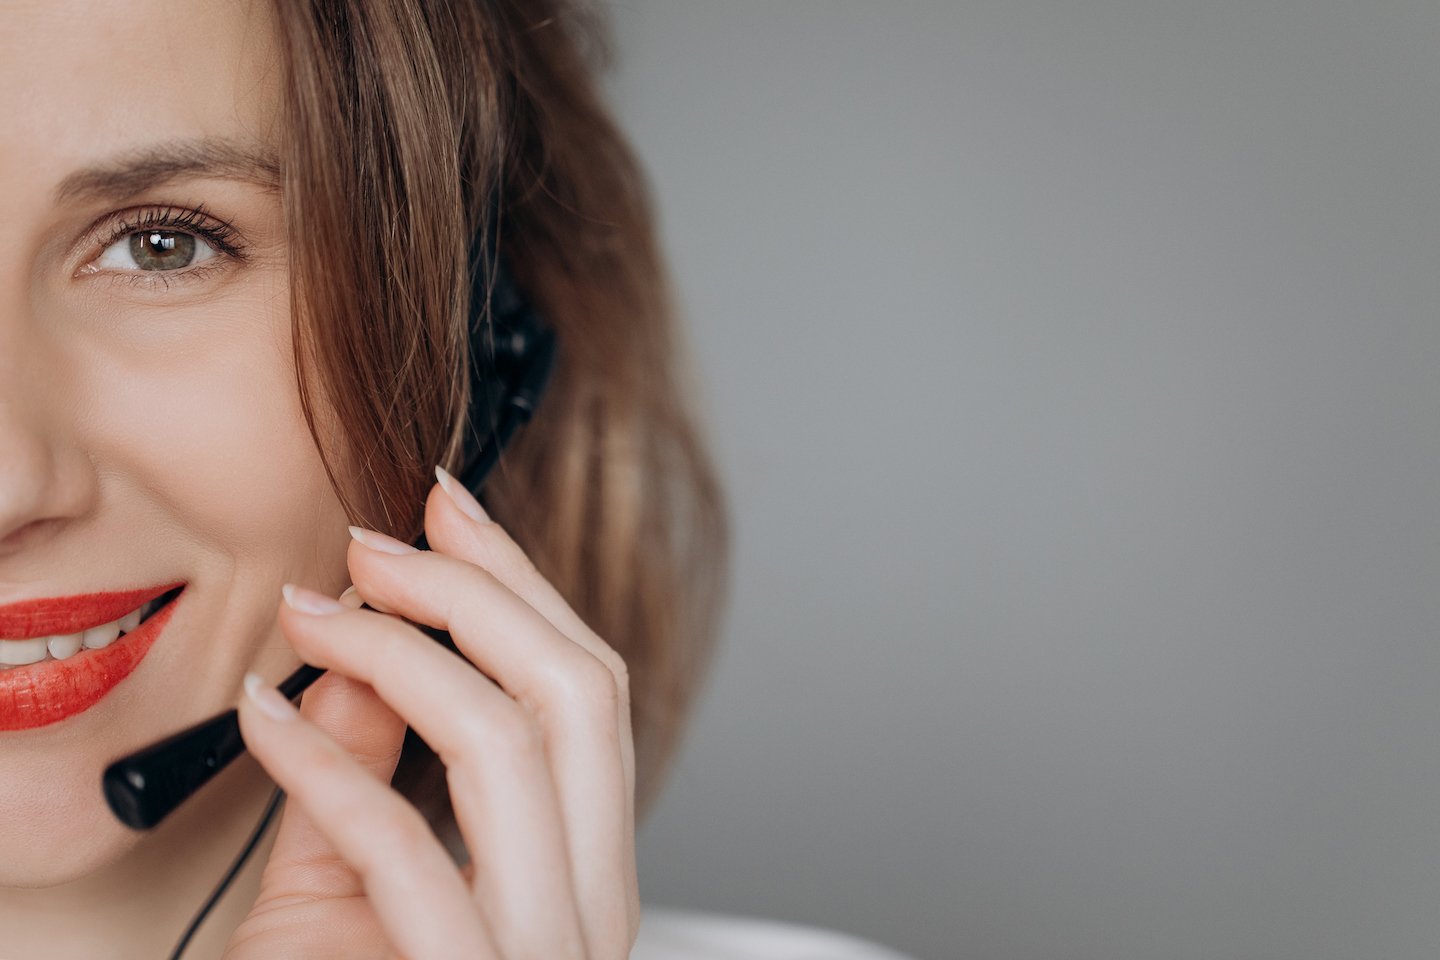 How to Choose the Right HIPAA Compliant Phone Answering Service